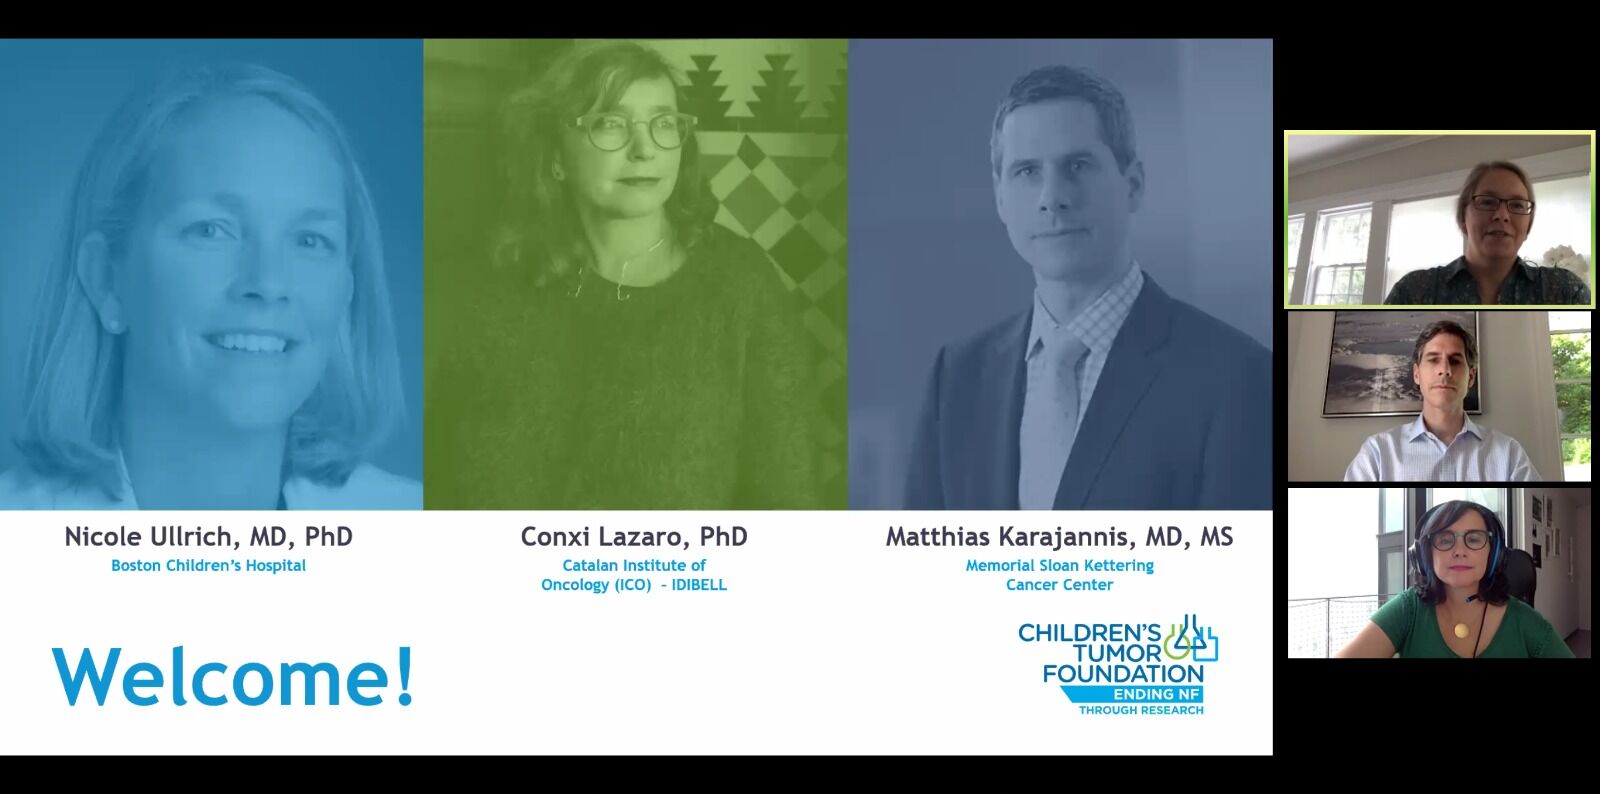 Screenshot of a virtual panel discussion titled "Welcome!" with four speakers' names and titles displayed: Nicole Ullrich, Conxi Lazaro, Matthias Karajannis, and one unidentified participant.